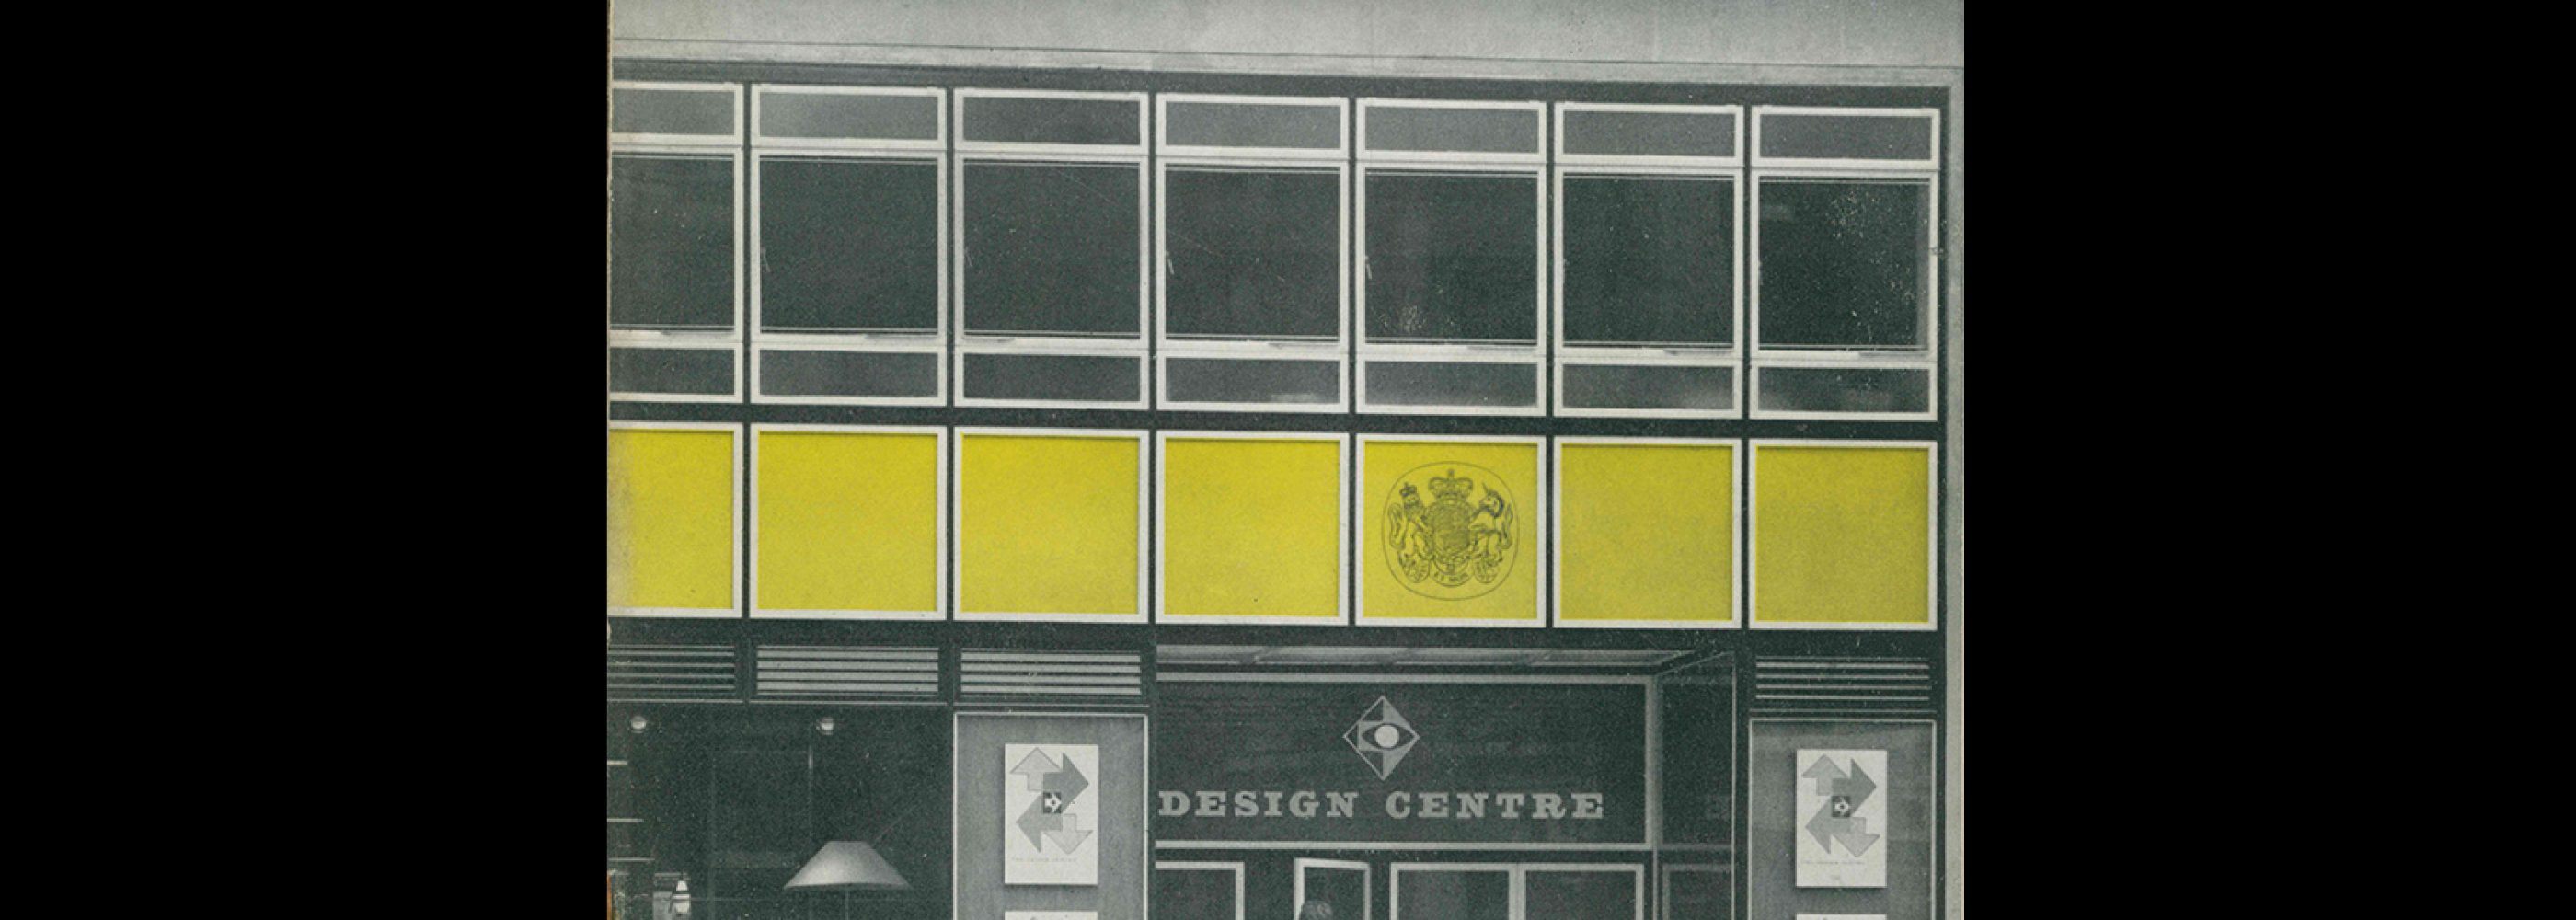 Design, Council of Industrial Design, 89, May 1956